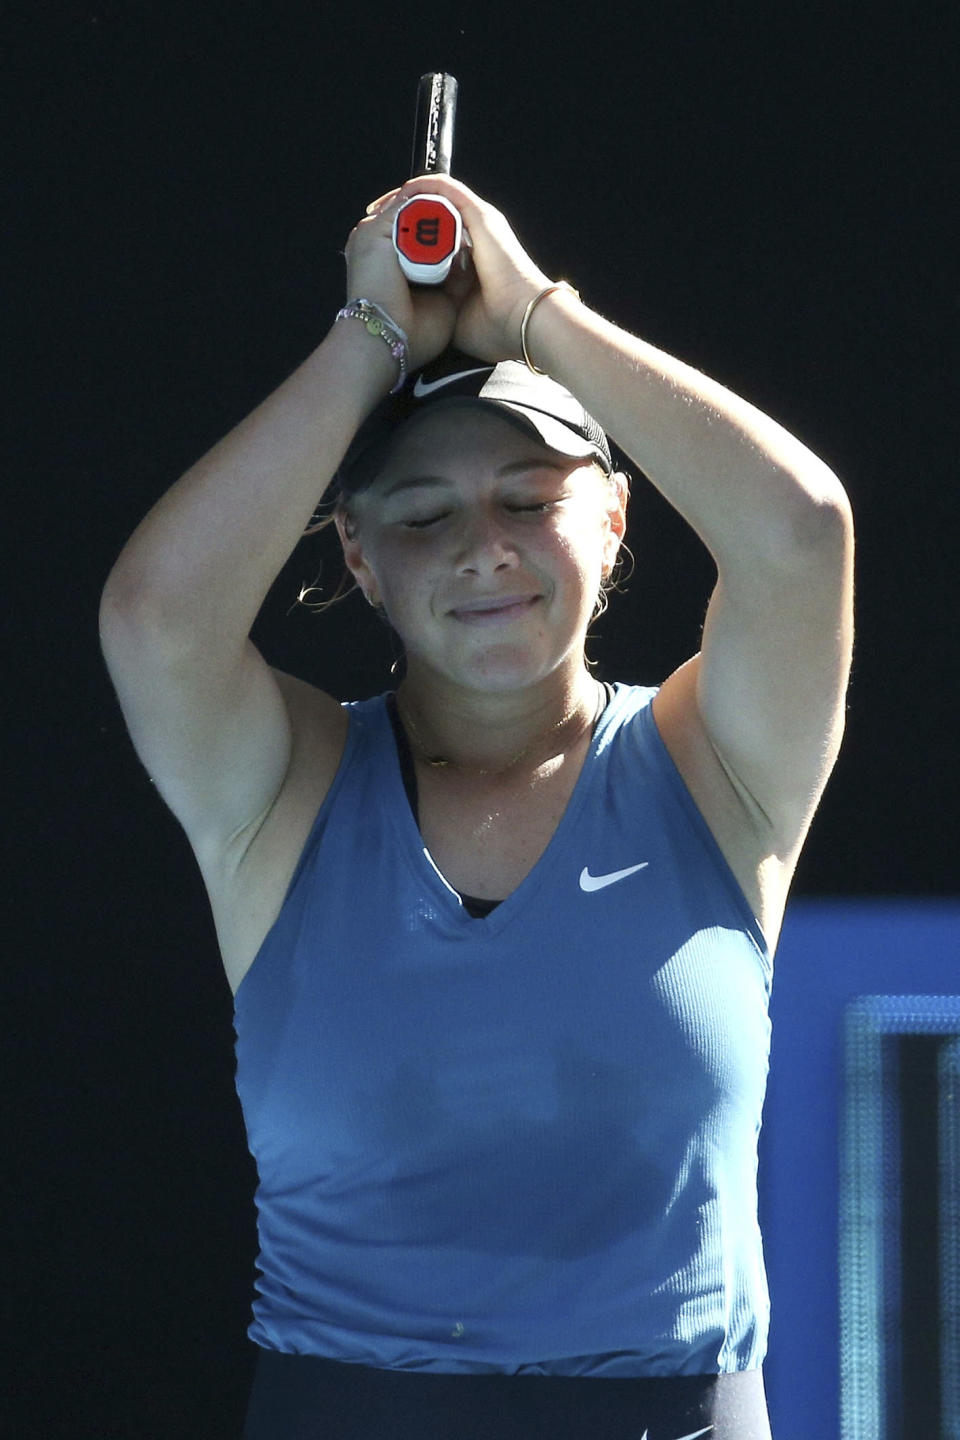 Amanda Anisimova of the United States reacts to winning the match during her singles match against Aliaksandra Sasnovich of Belarus during the women's final of the Summer Set 2 tournament ahead of the Australian Open in Melbourne, Australia, Sunday, Jan. 9, 2022. (AP Photo/Hamish Blair)